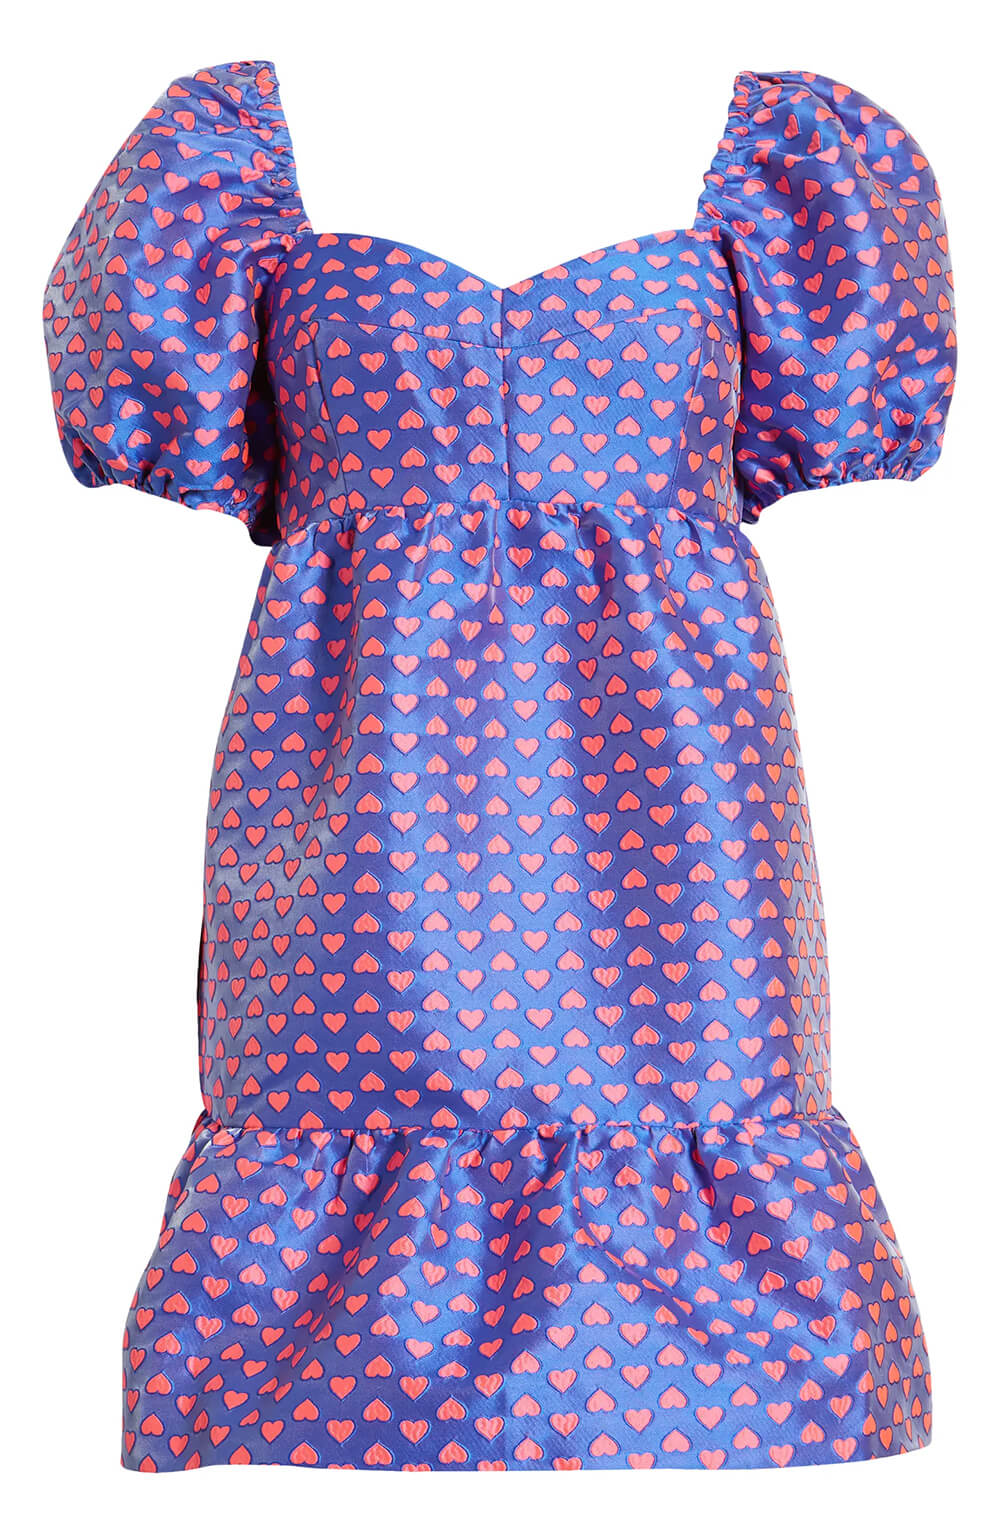 lilly pulitzer nelle heart jacquard dress